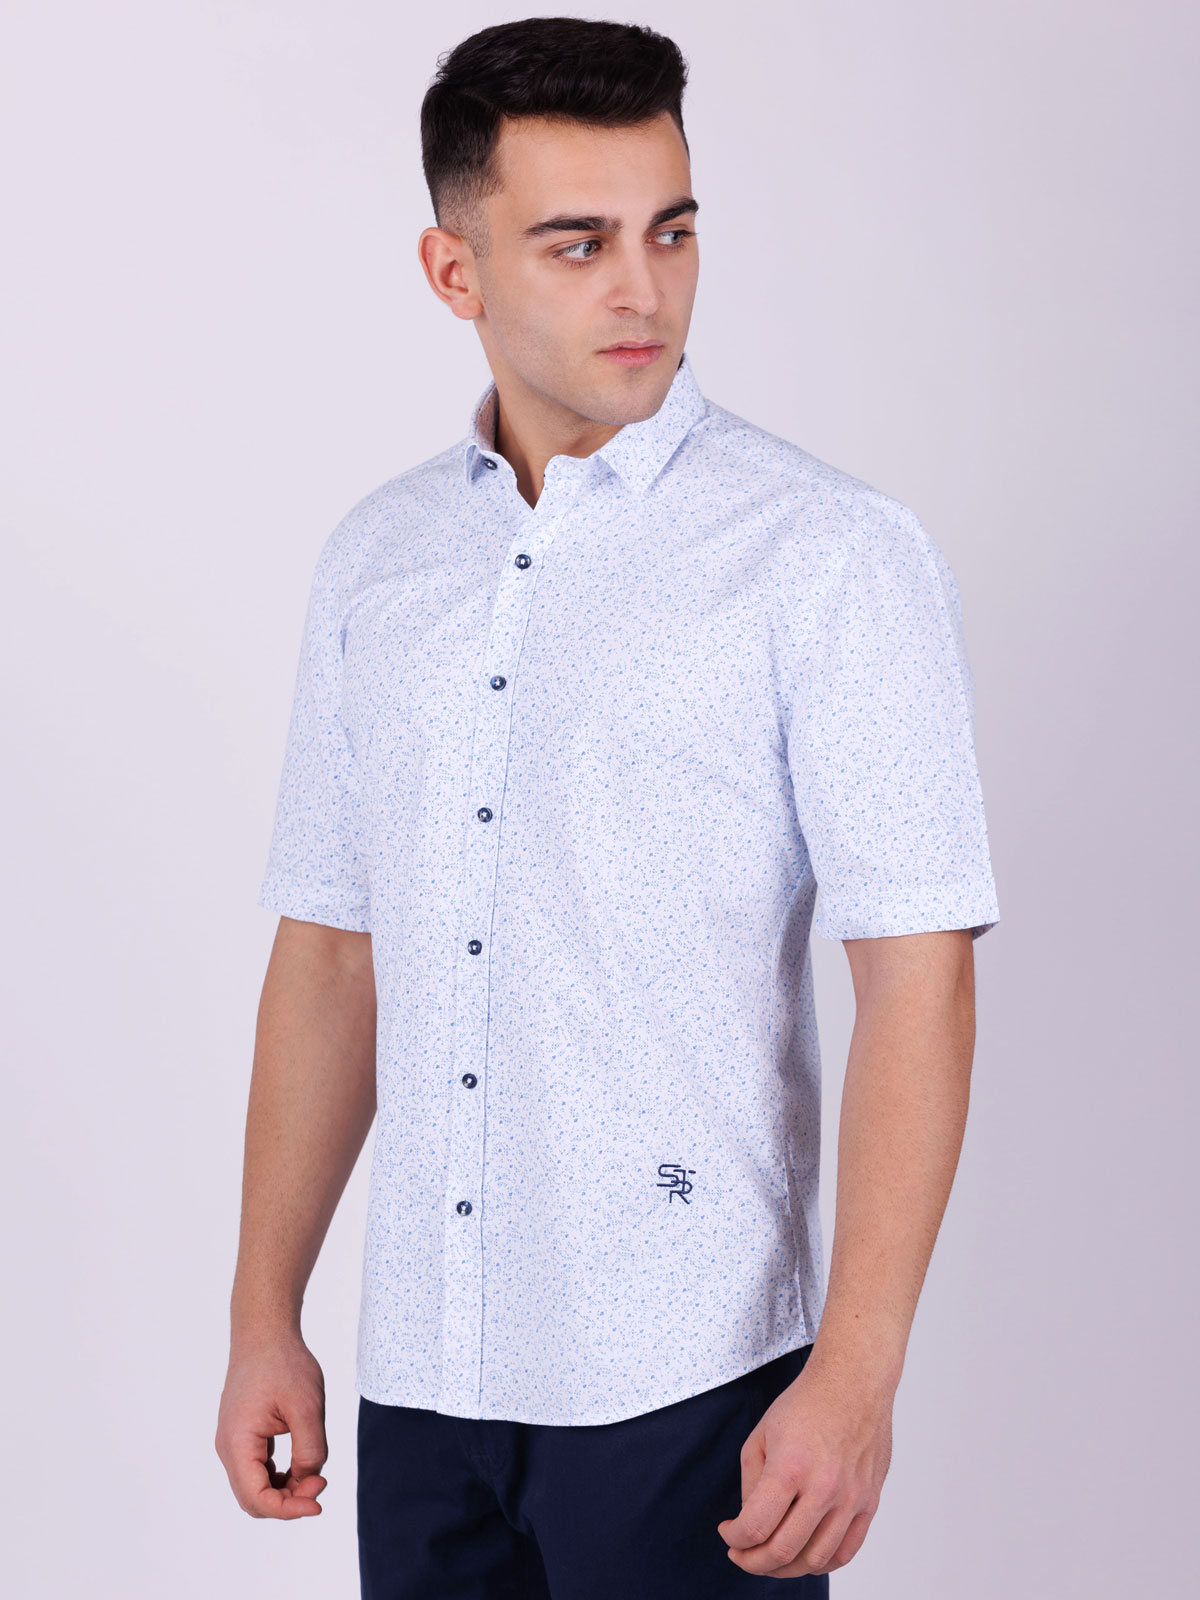 Shirt in white with small blue figures - 80231 € 38.81 img3